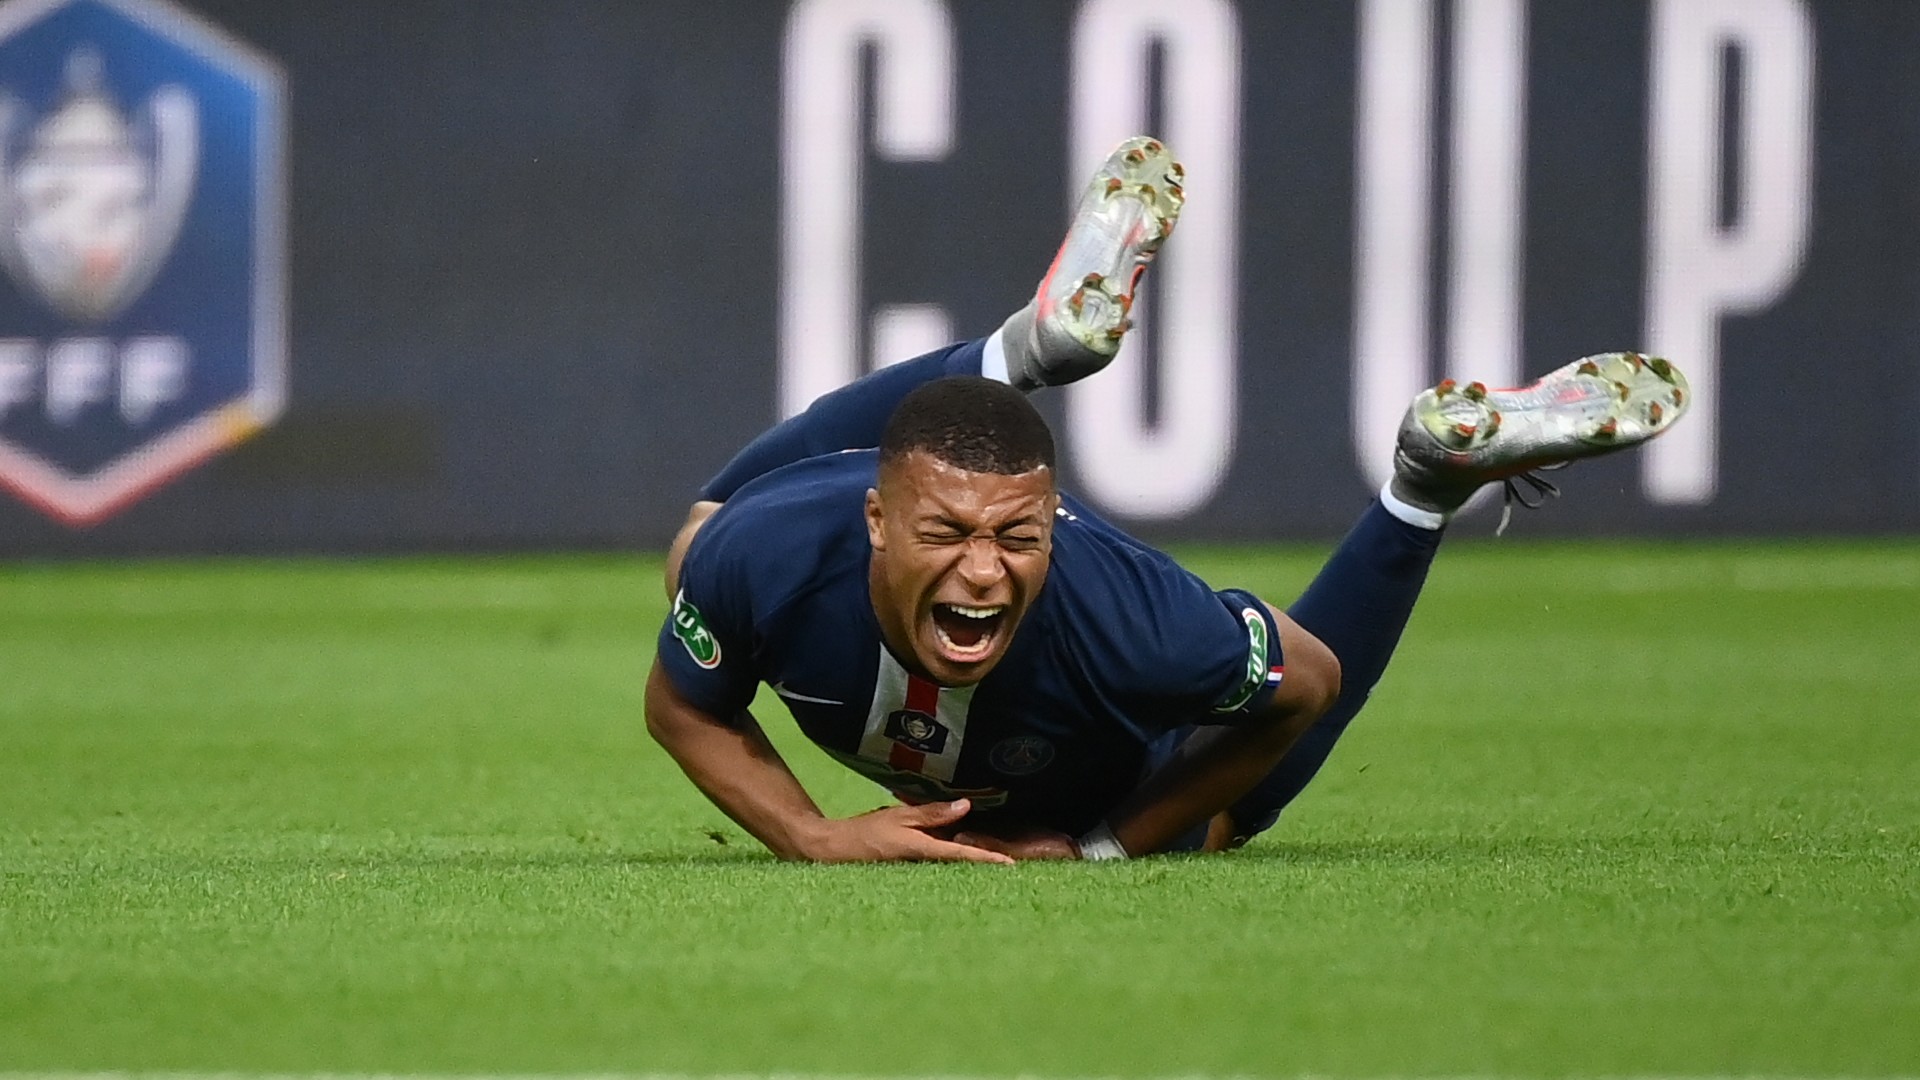 Wenger backs PSG star Mbappe to be fit for Champions League clash with Atalanta